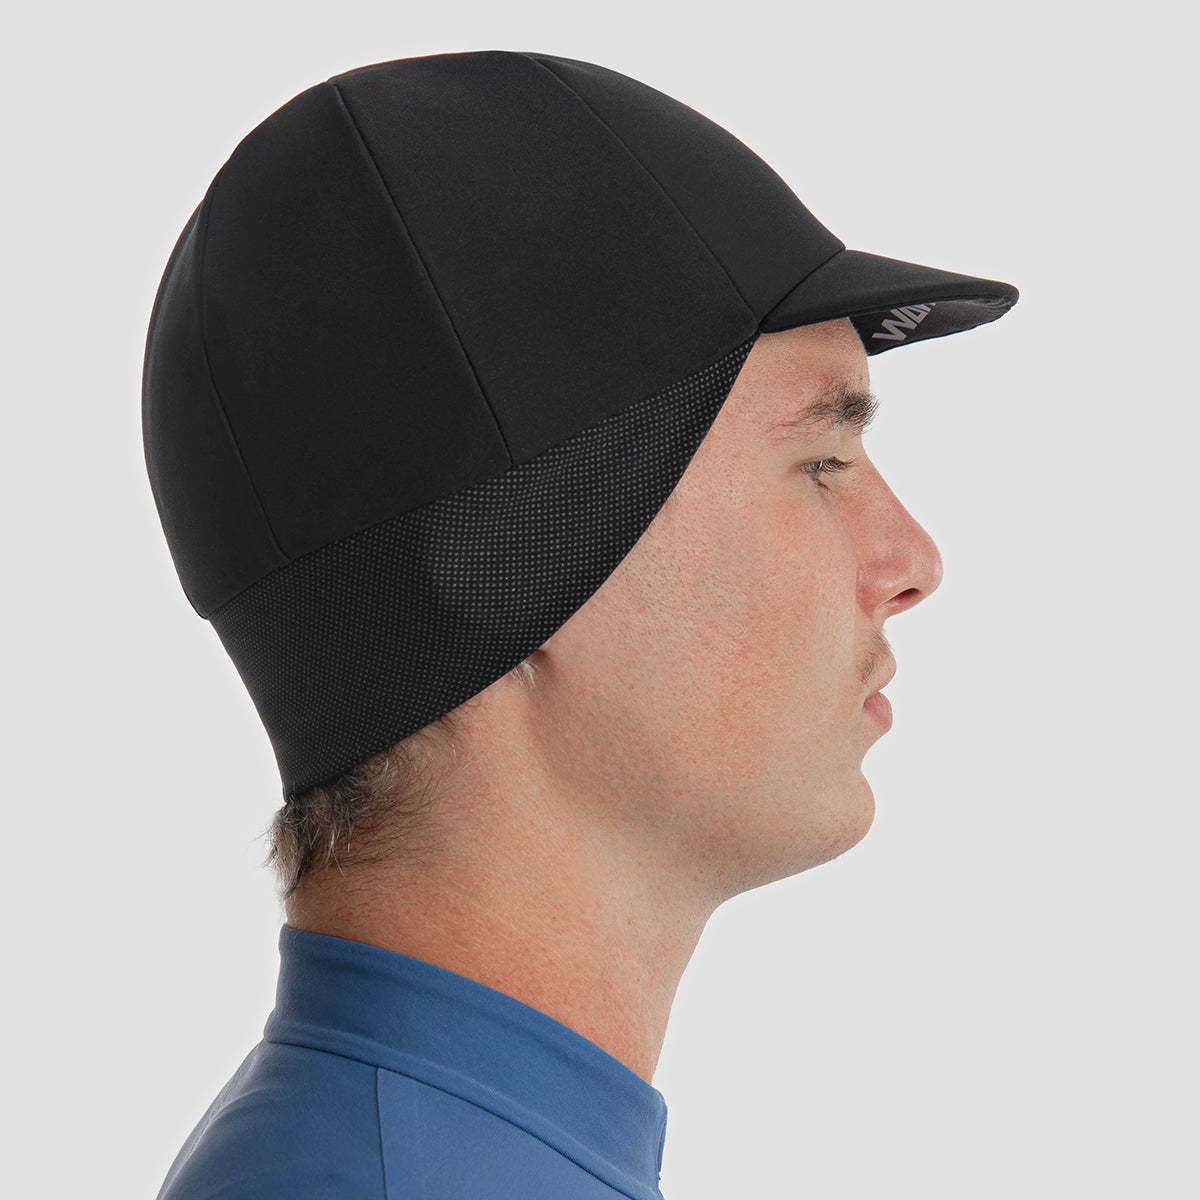 Pro Reflective Windproof Thermal Cap - Black